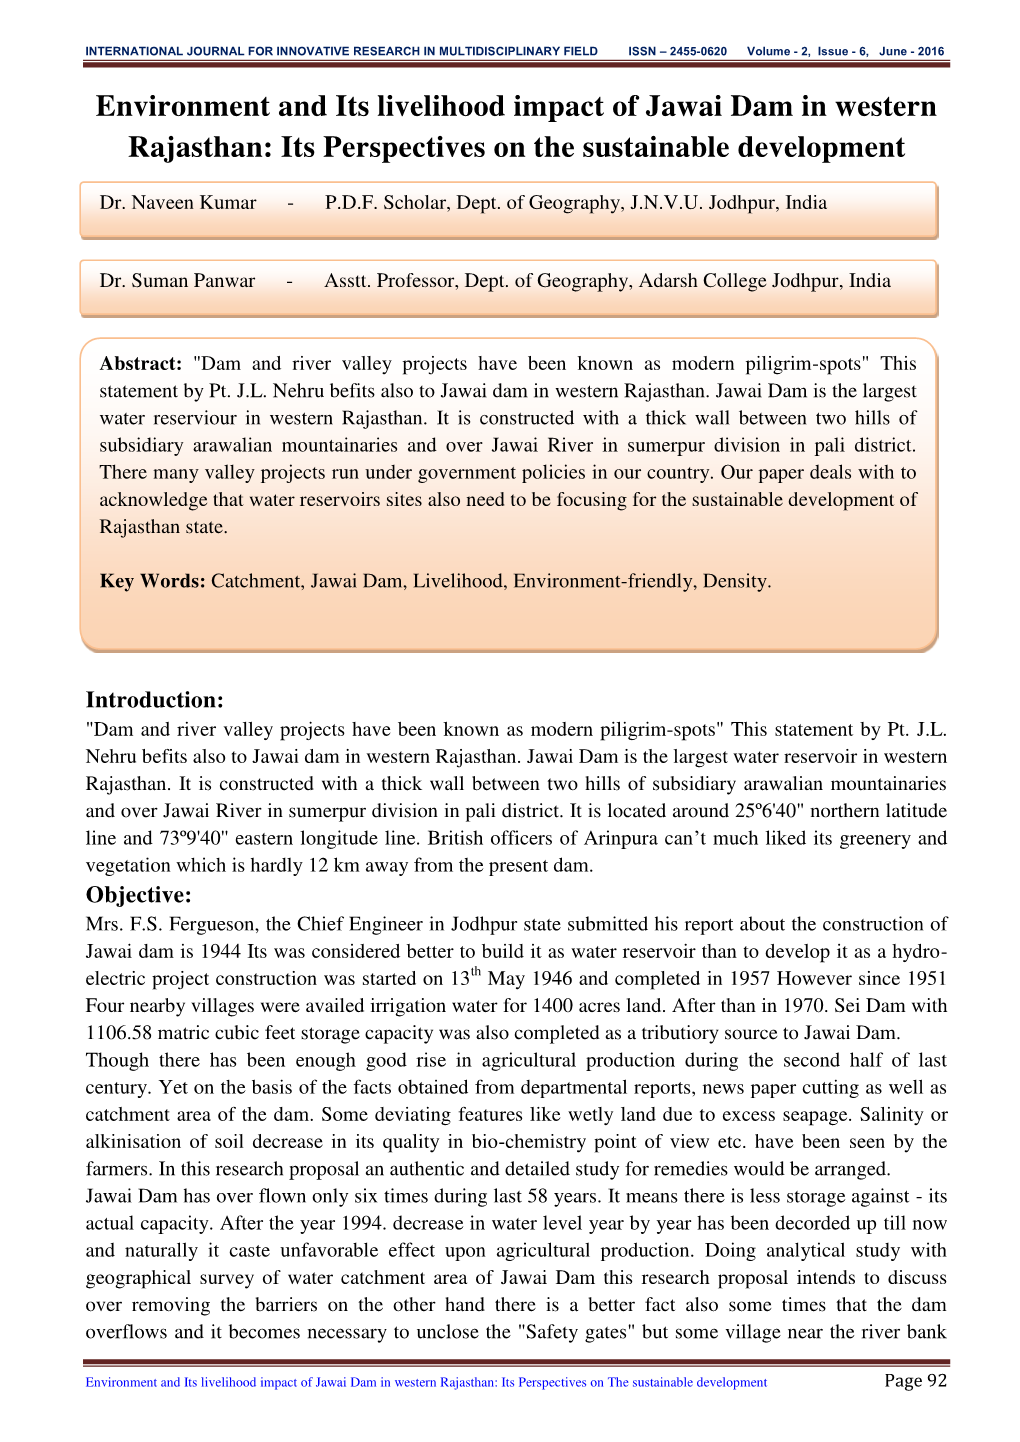 Environment and Its Livelihood Impact of Jawai Dam in Western Rajasthan: Its Perspectives on the Sustainable Development